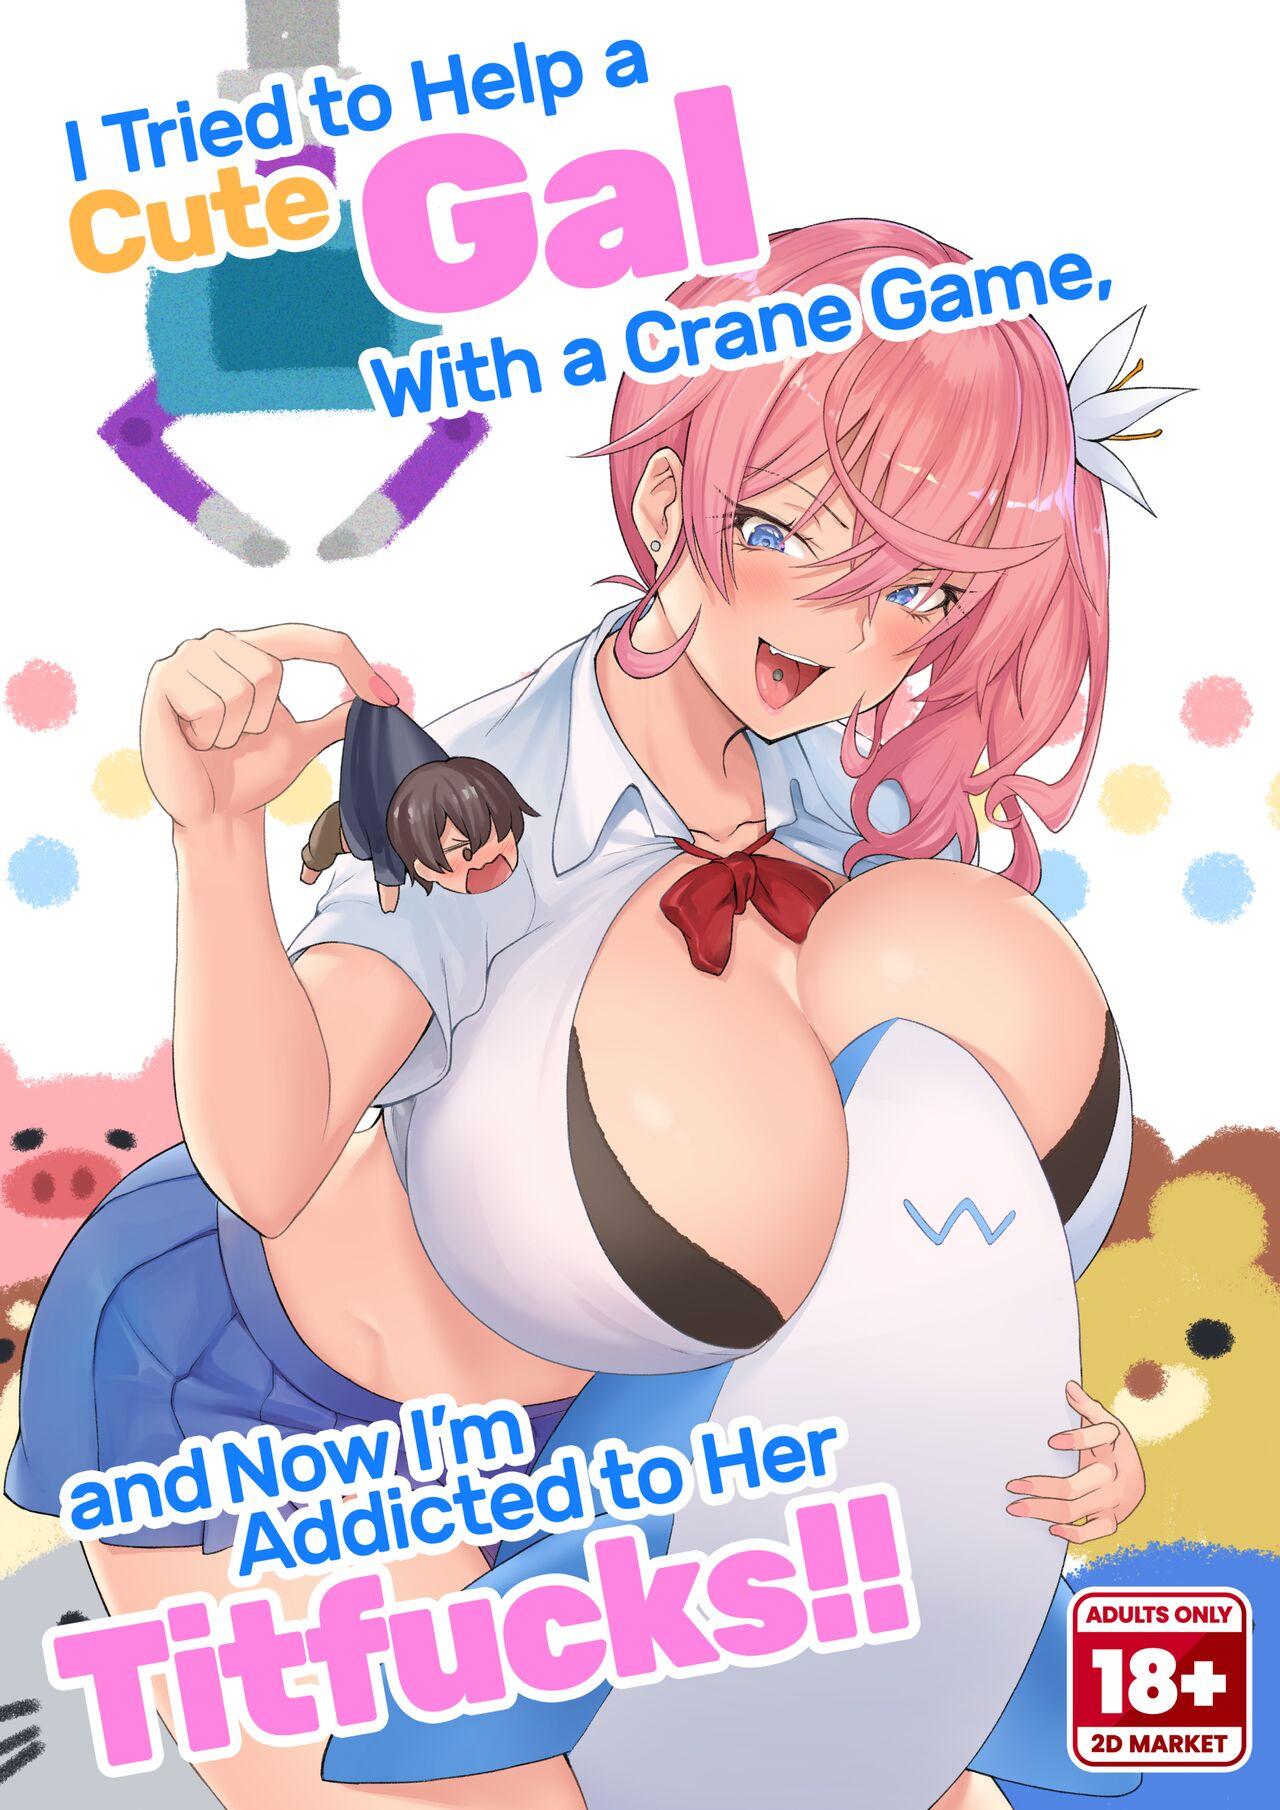 I Tried to Help a Cute Gal With a Crane Game, and Now I’m Addicted to Her Titfucks 0